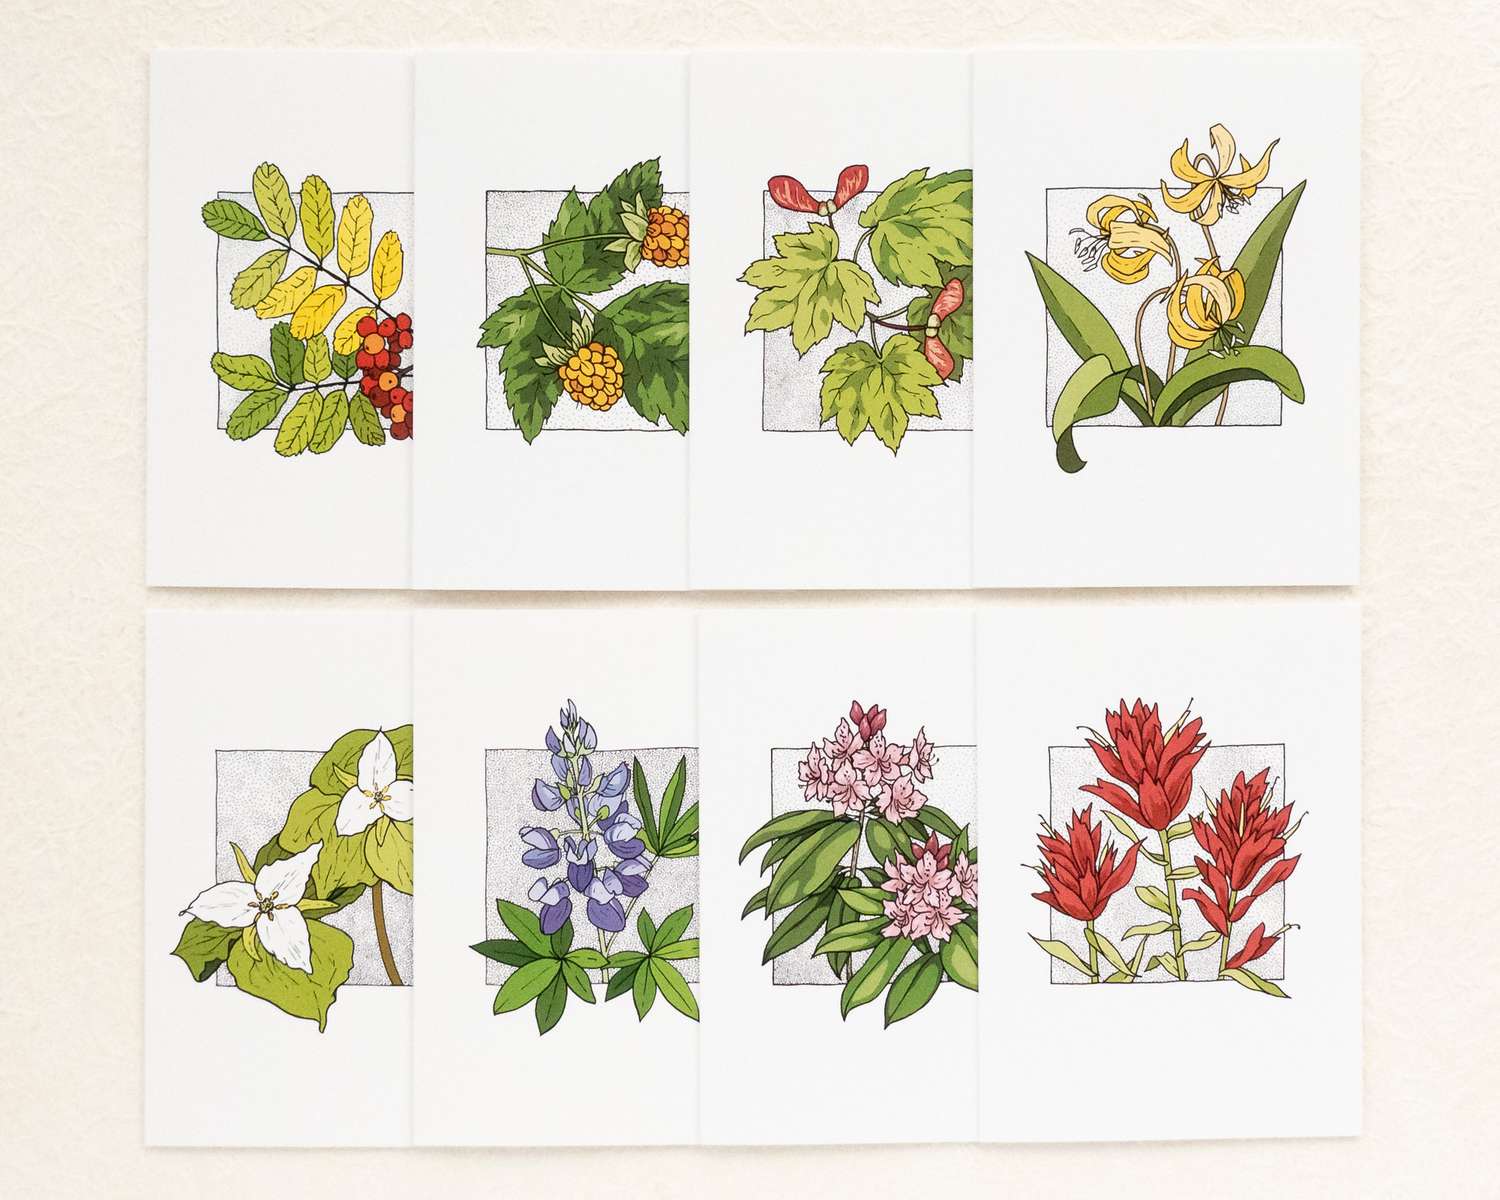 a 2x4 grid of vertical white cards with colorful flowers and plants